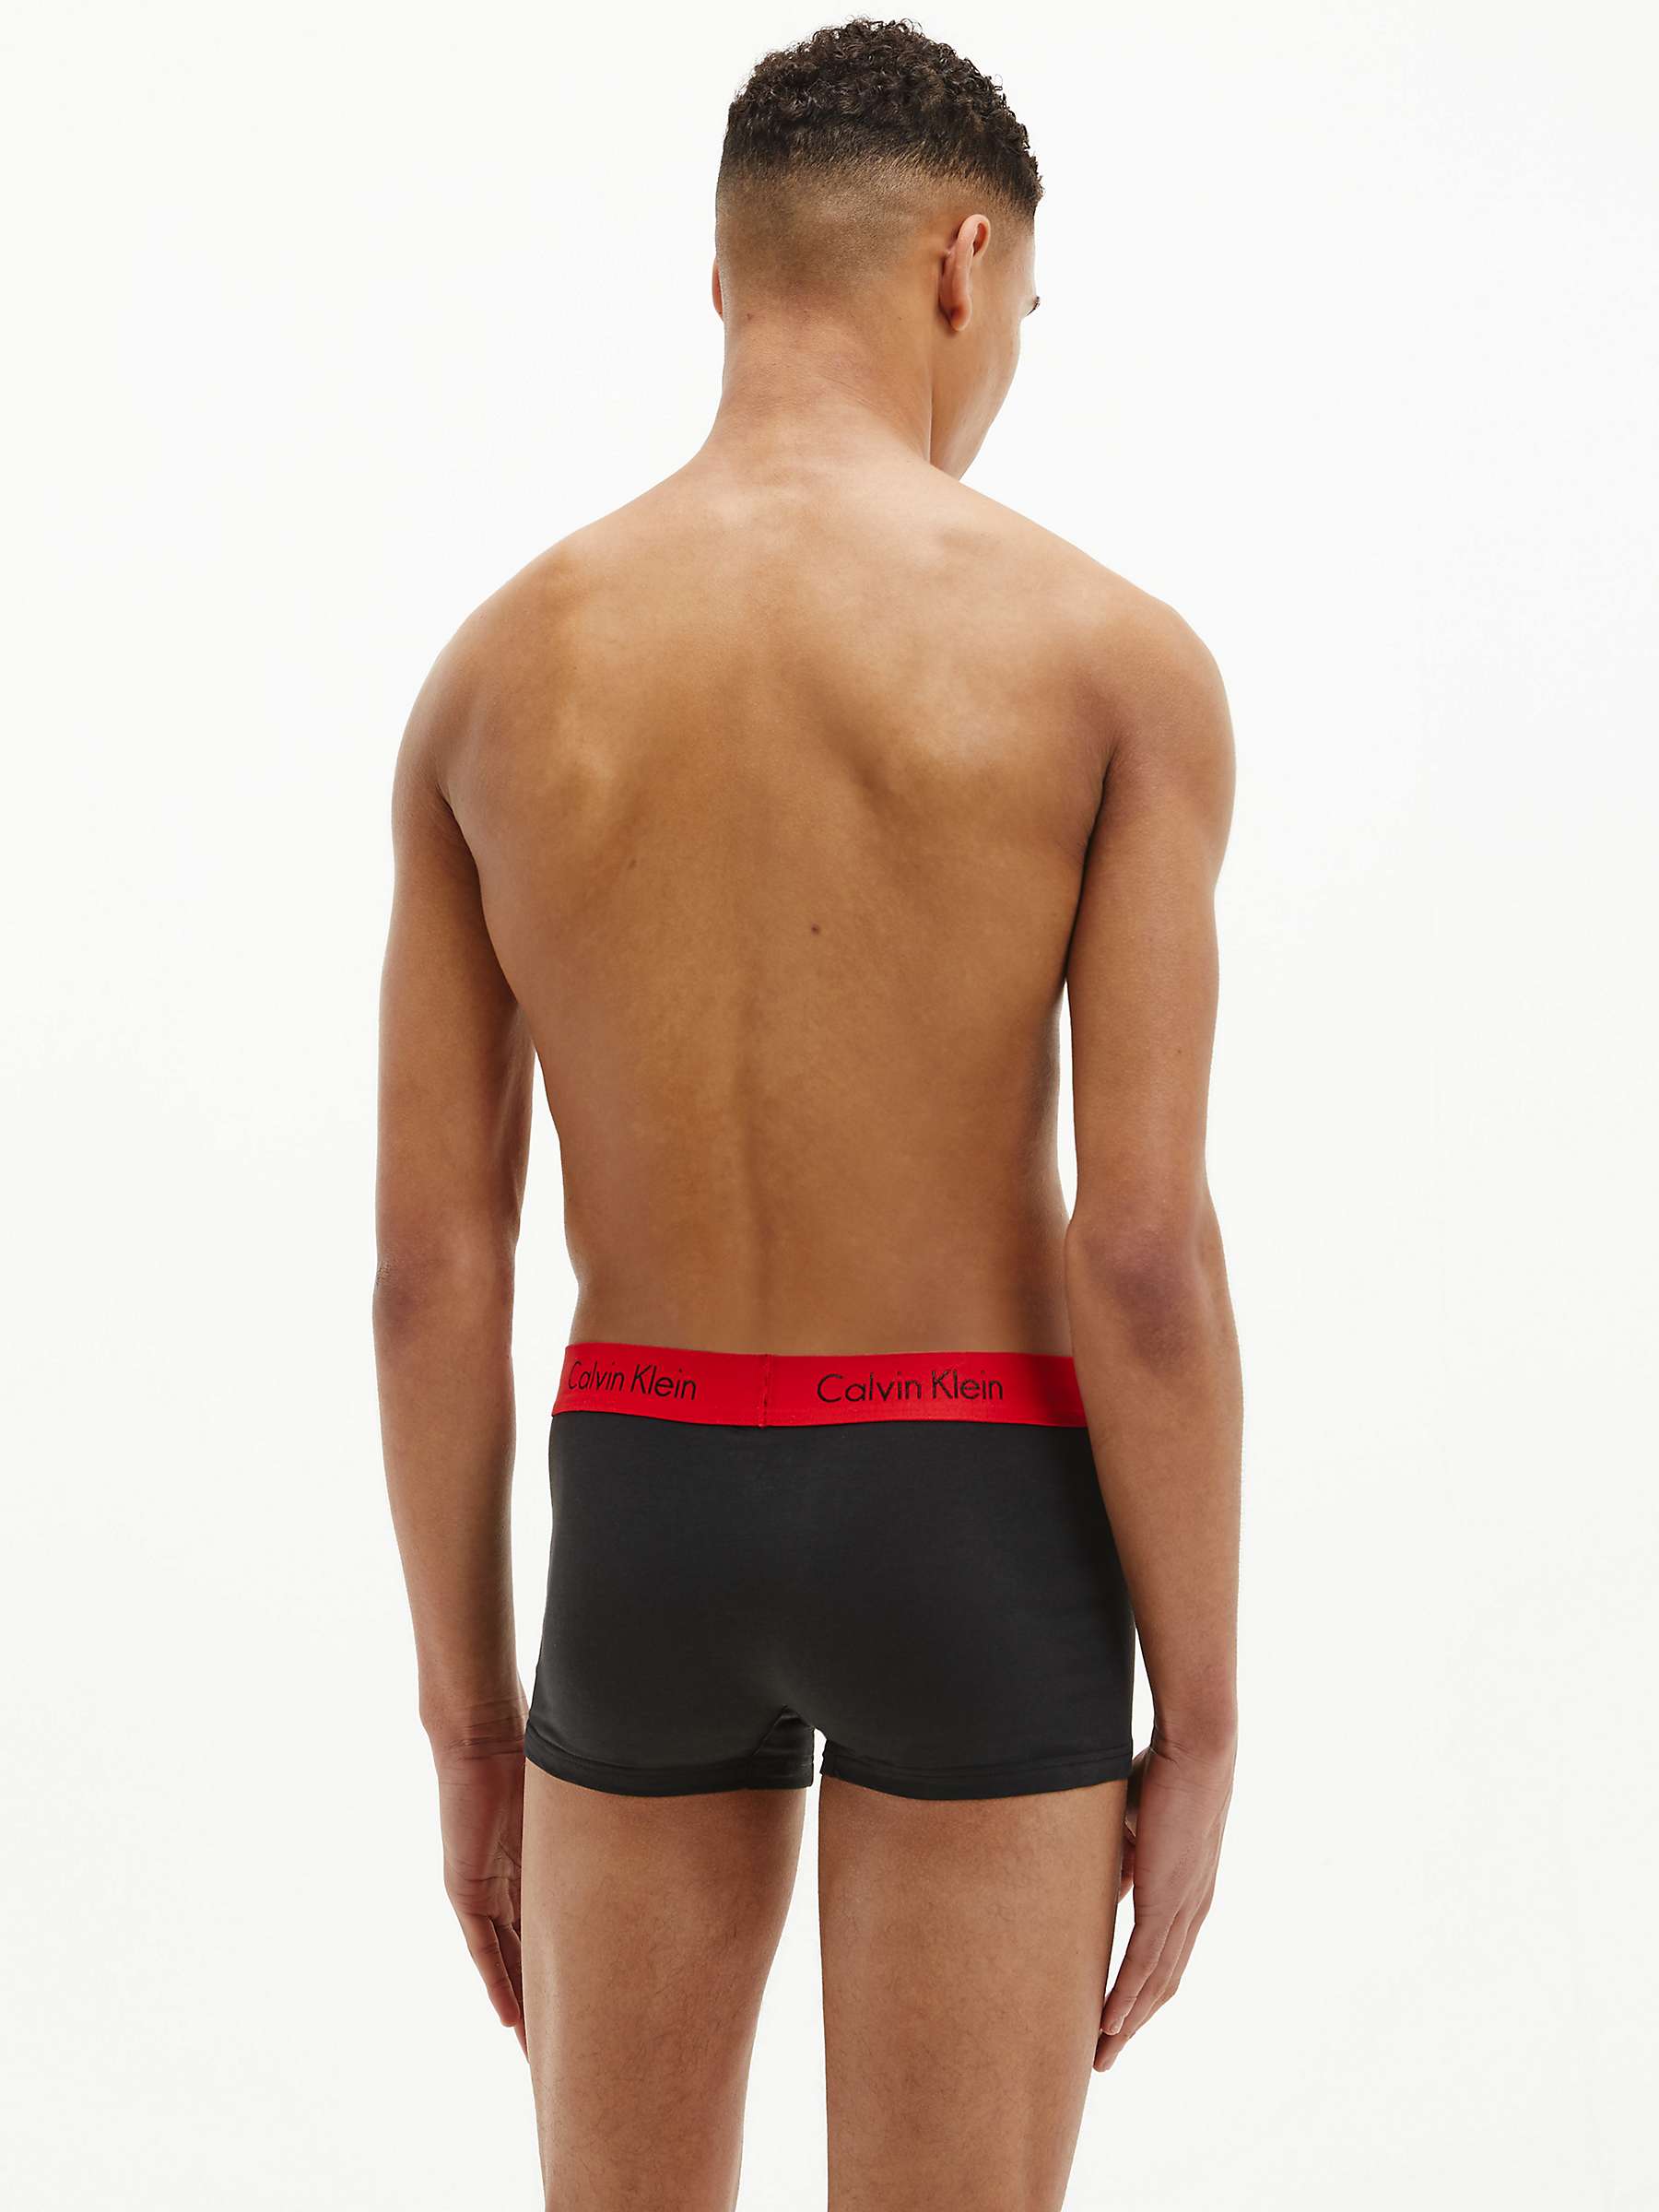 Buy Calvin Klein Cotton Stretch Trunks, Pack of 2, Black/Red Online at johnlewis.com